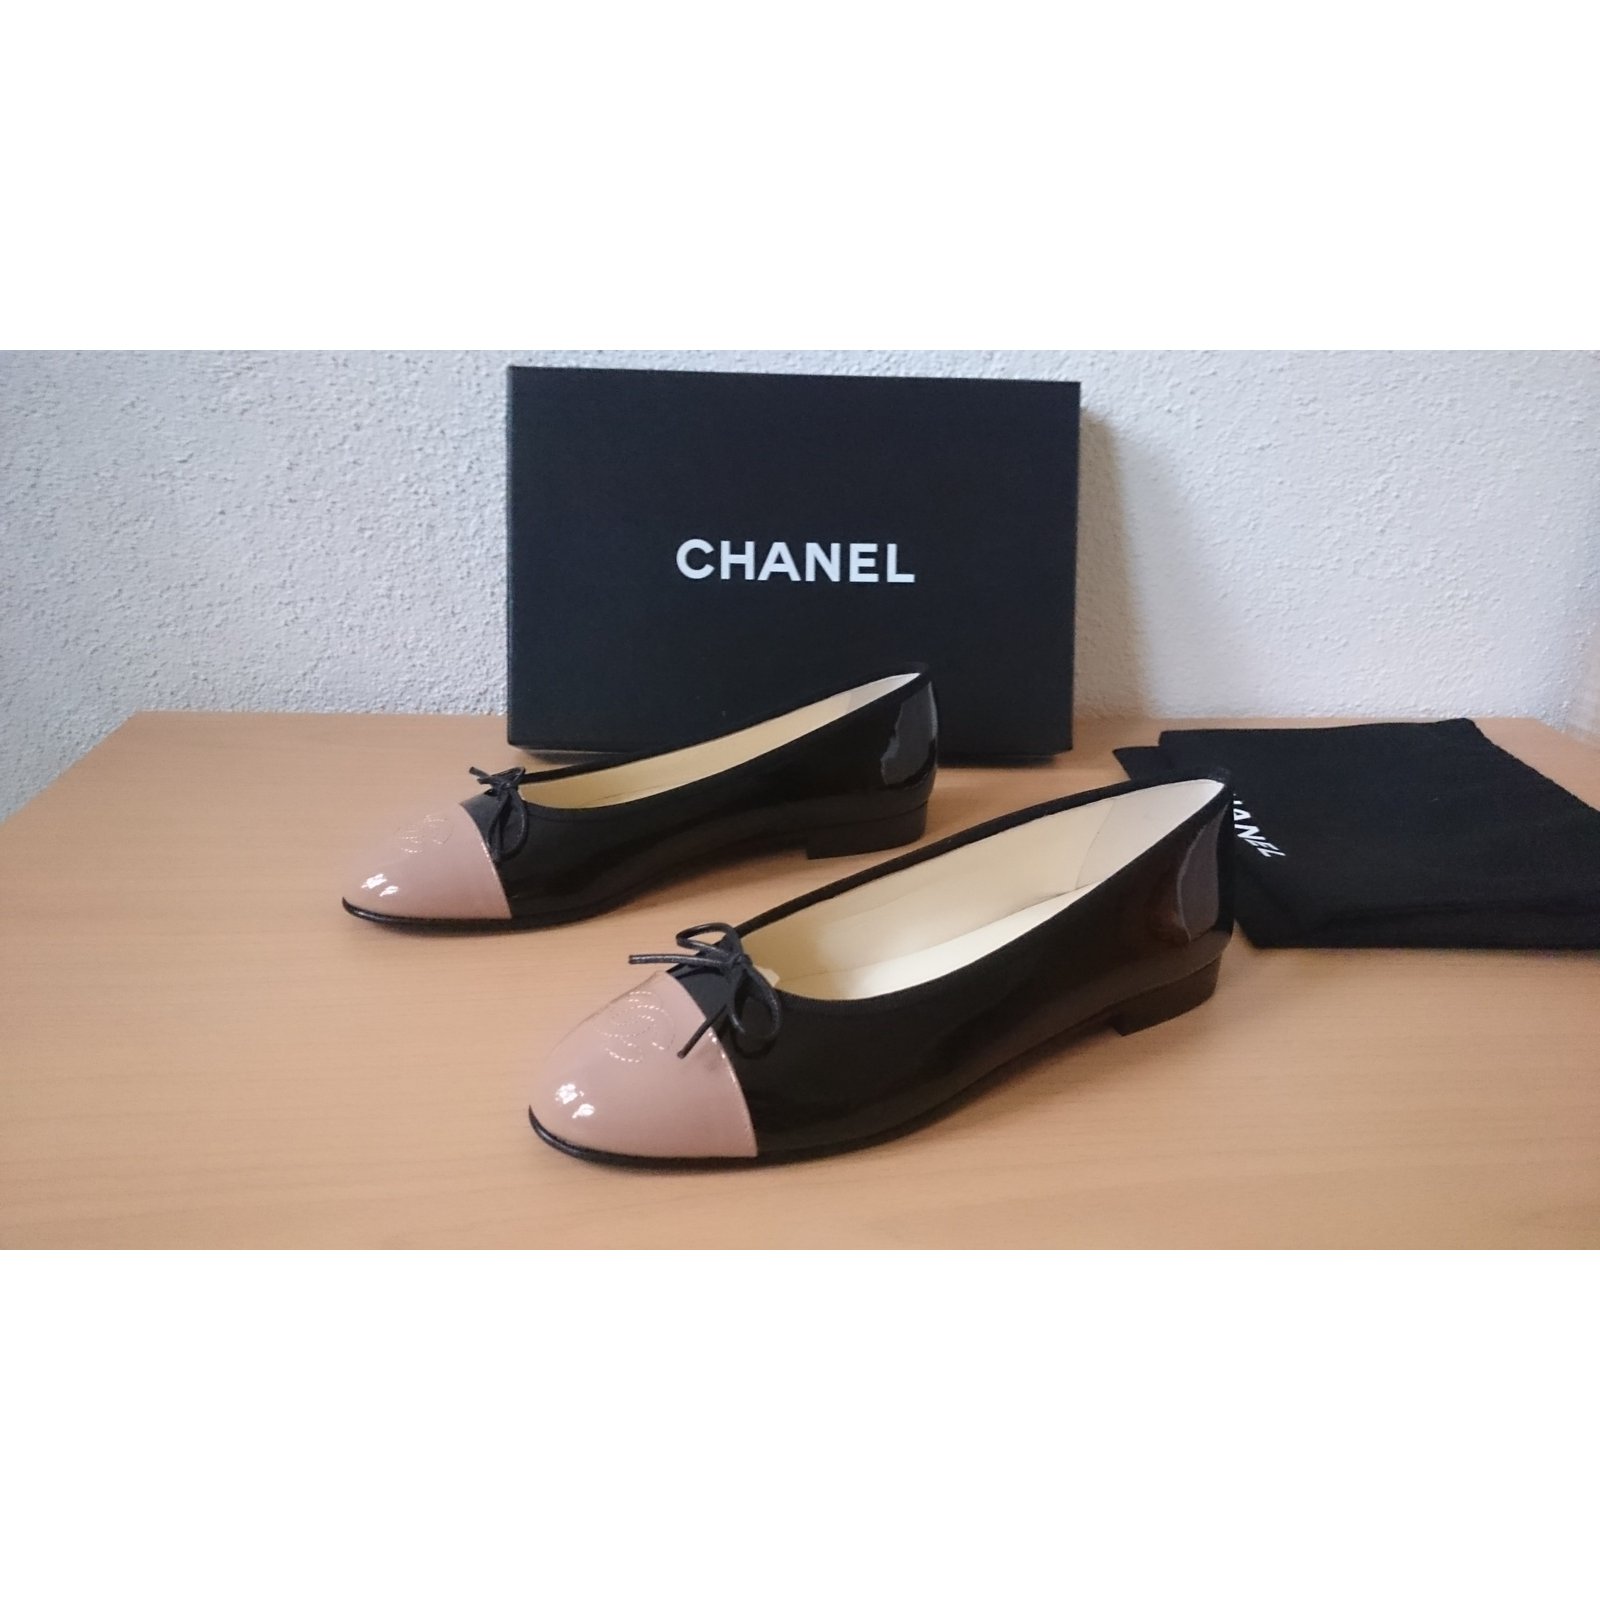 Chanel Chanel Ballet flats, Size 39 